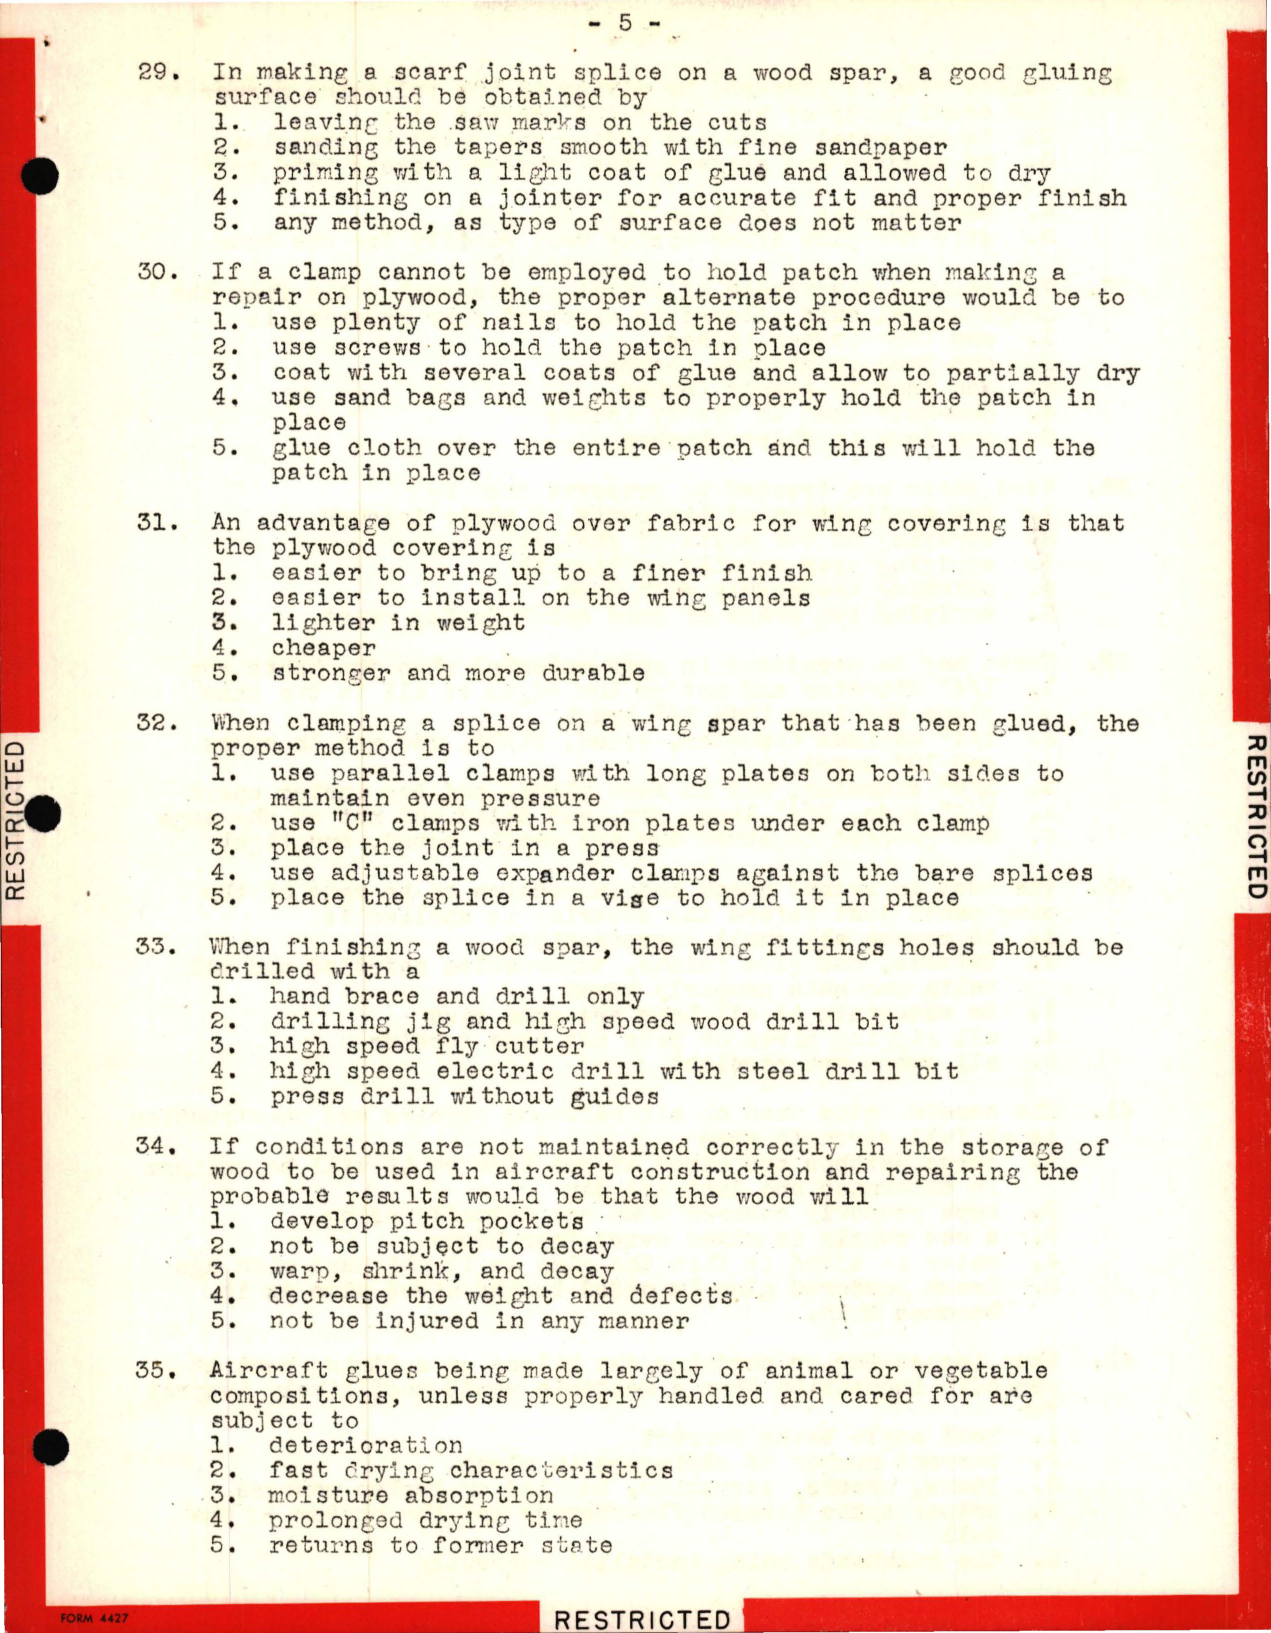 Sample page 5 from AirCorps Library document: Instructor Training Questions for Wood, Fabric, Covering and Doping - Lockheed-Vega Service School